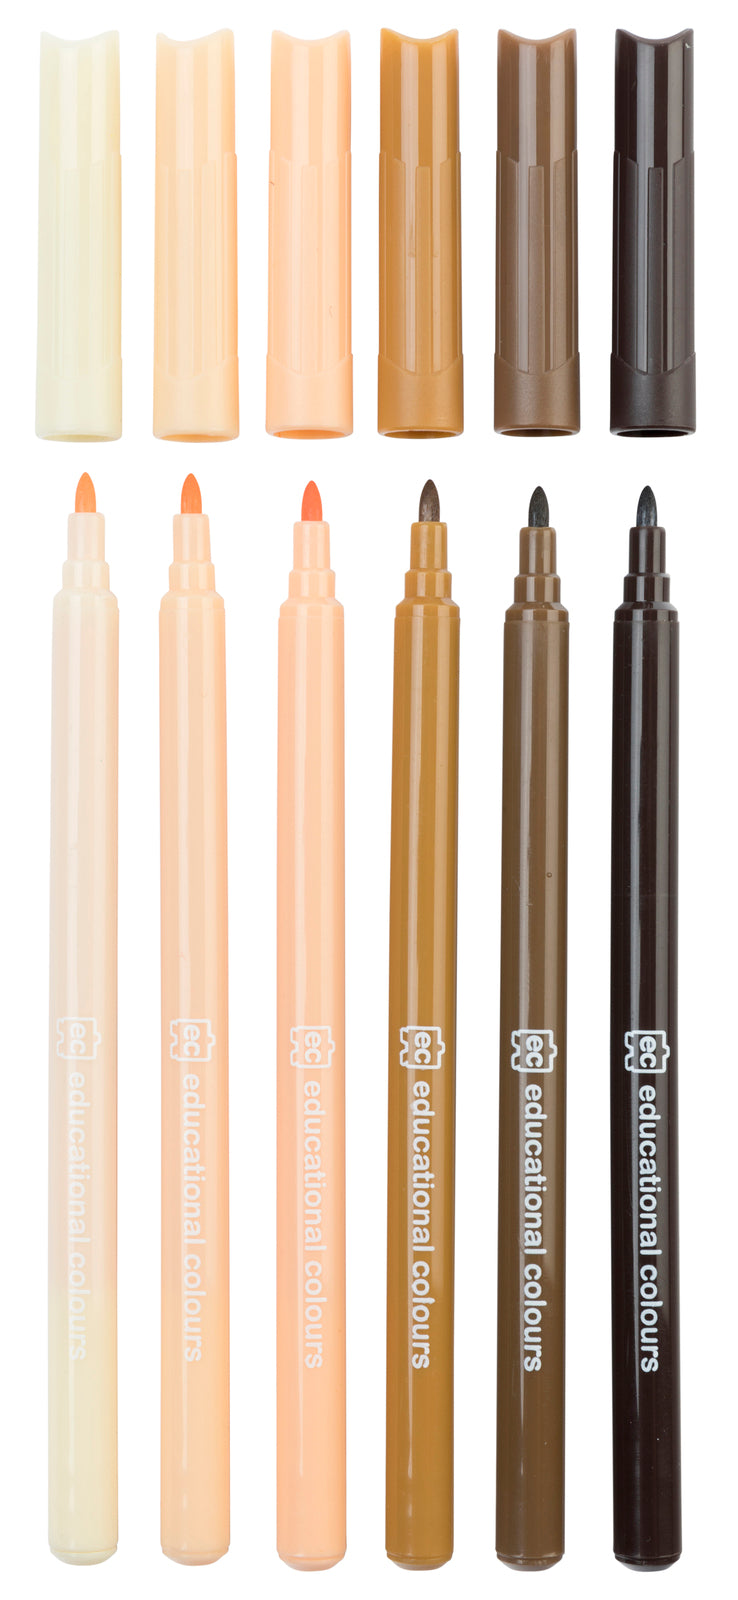 Master Skin Tone Markers Packet of 6